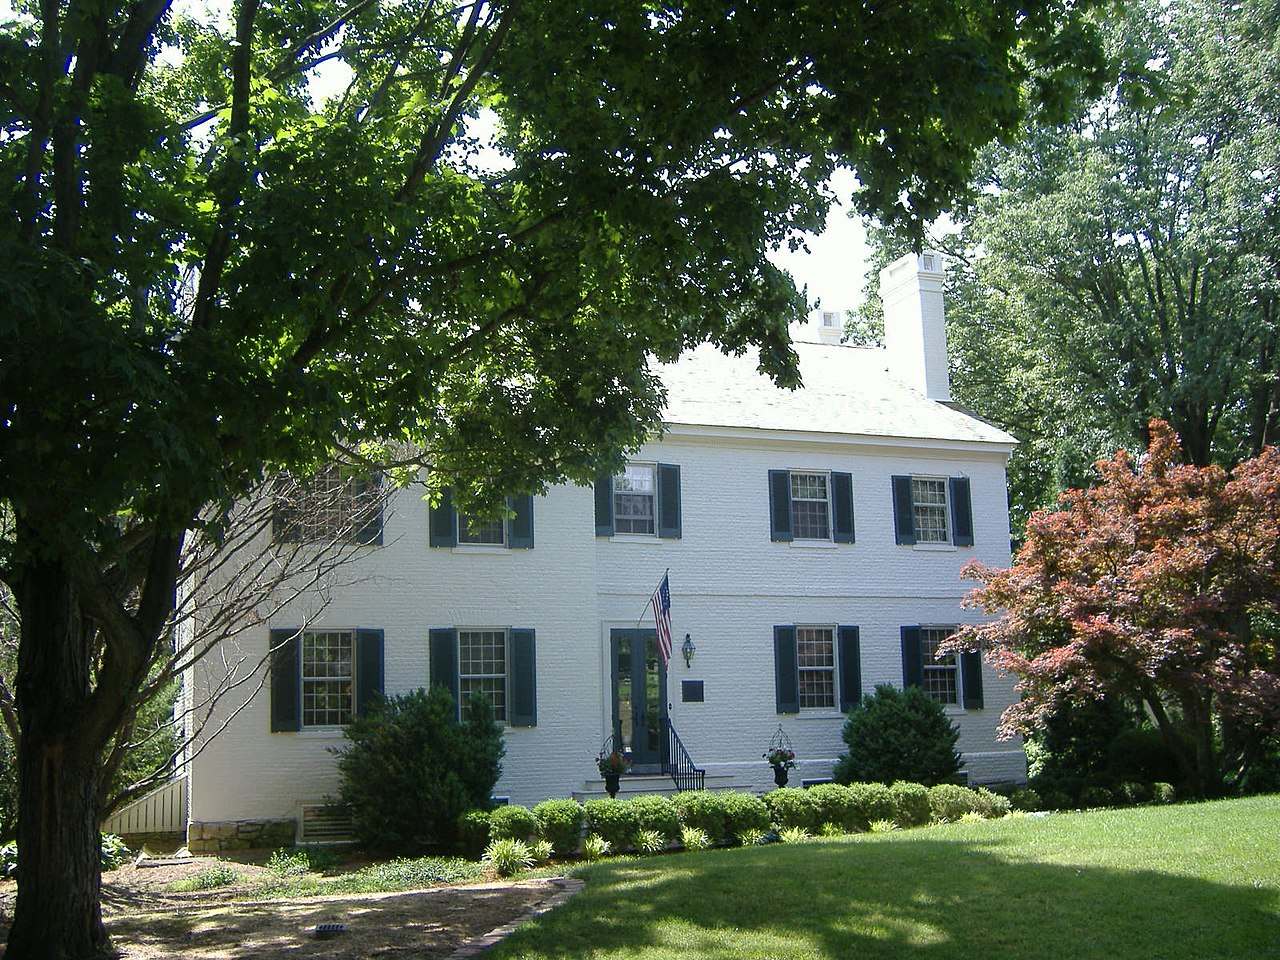 Taylor's childhood home in Louisville, Kentucky